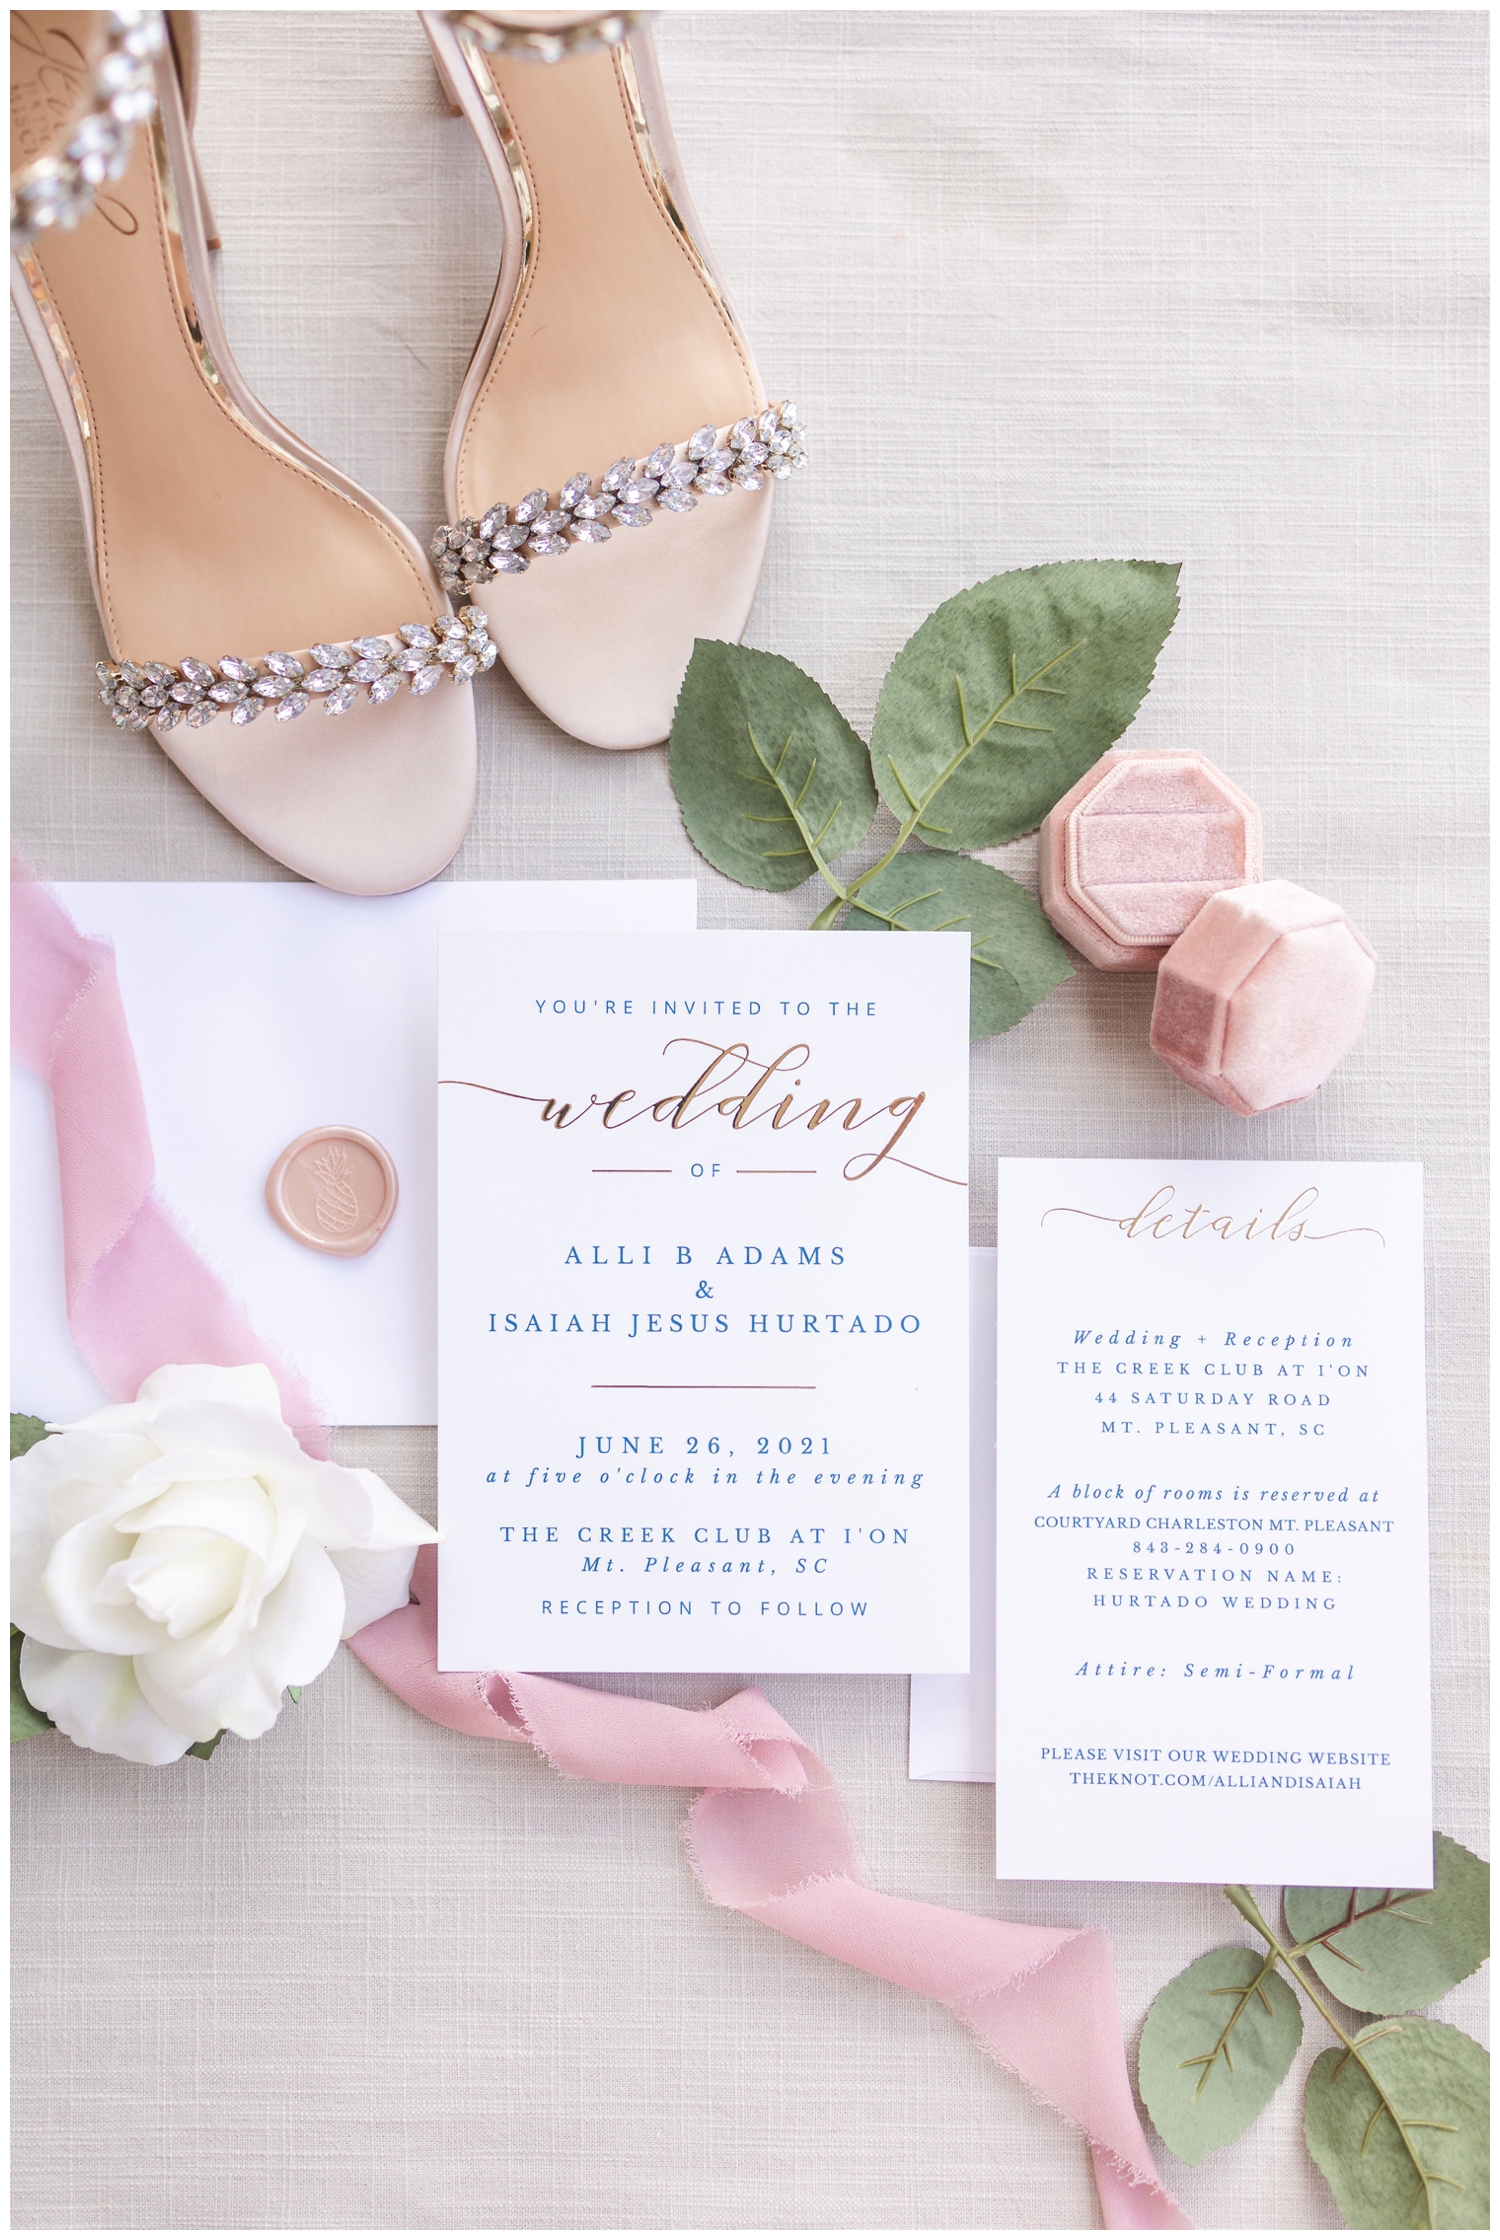 blush pink and white invitation suite plus nude heels